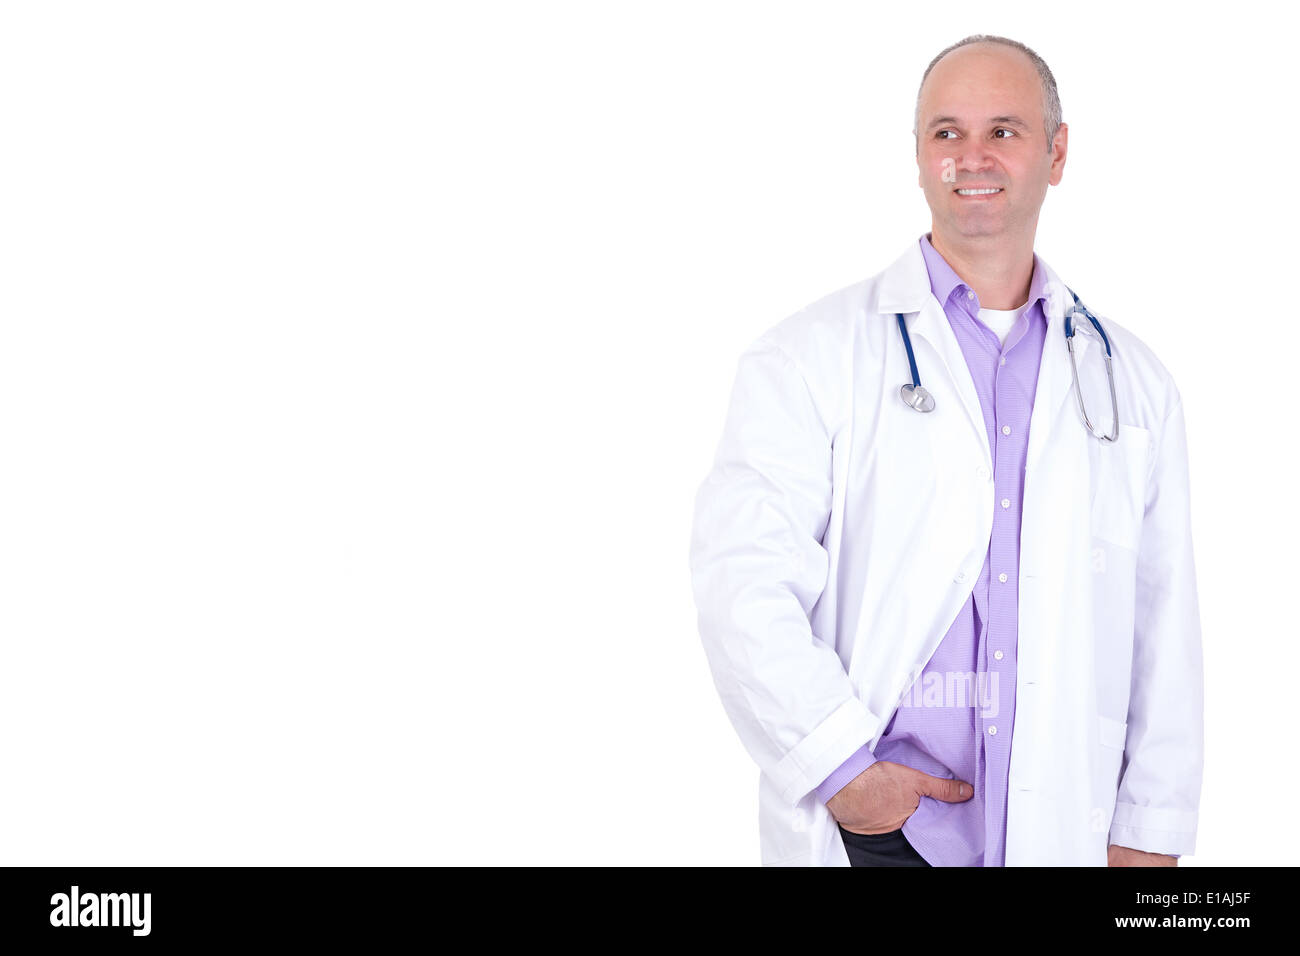 Middle age male practitioner doctor looking out anticipatory with a confident smile and relaxed Stock Photo